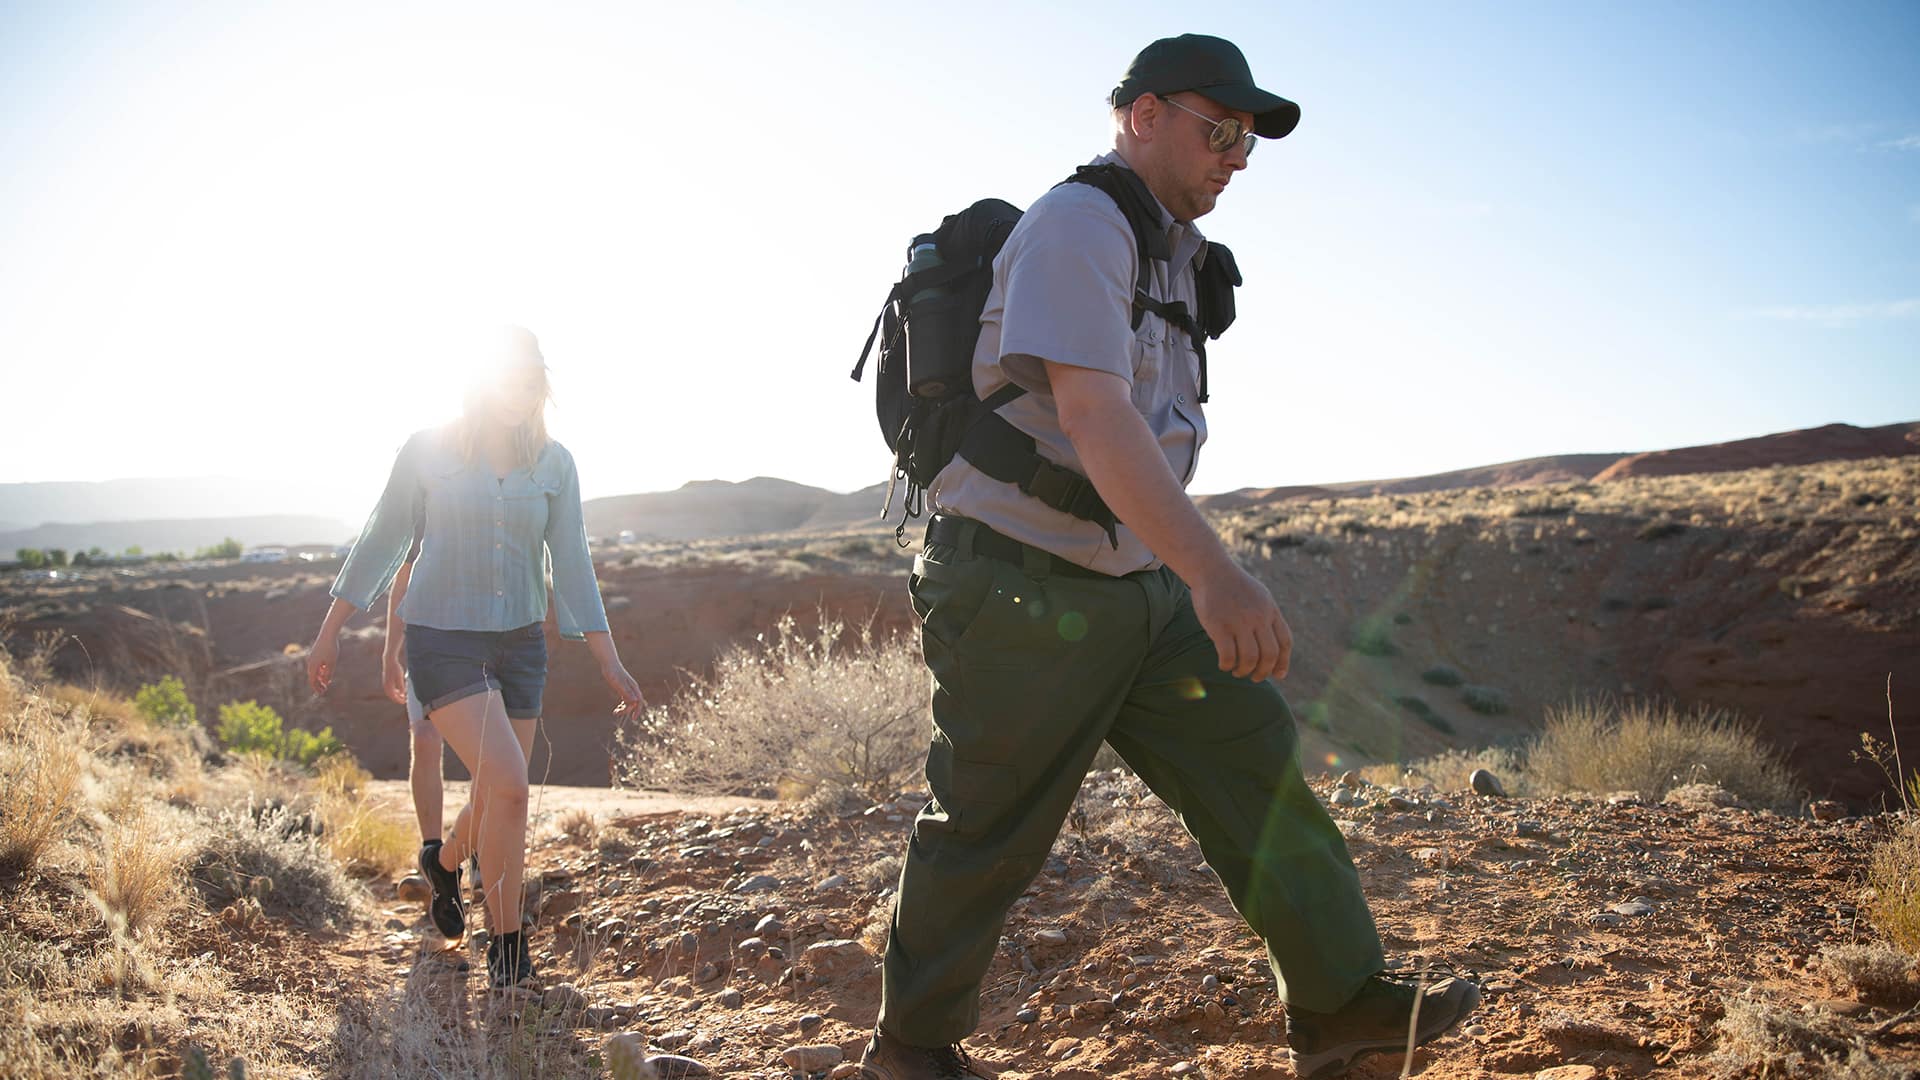 John Roos, who earned his SNHU degree in 2018, wearing a park ranger uniform, baseball cap and sunglasses as he leads two people on a hike through desert terrain. 